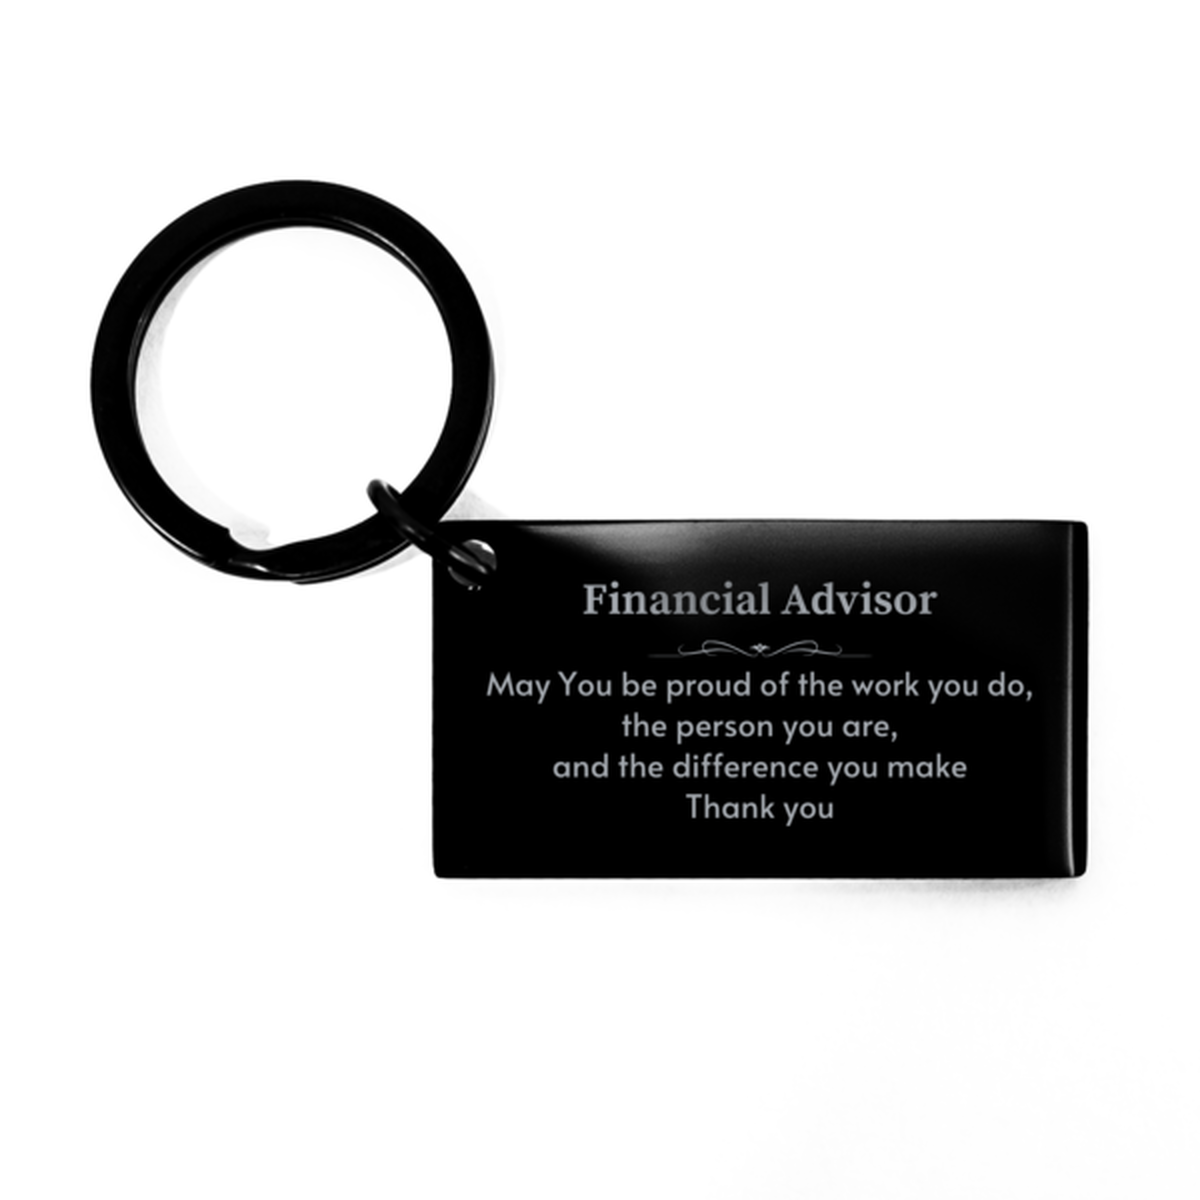 Heartwarming Keychain Retirement Coworkers Gifts for Financial Advisor, Law Enforcement Officer May You be proud of the work you do, the person you are Gifts for Boss Men Women Friends